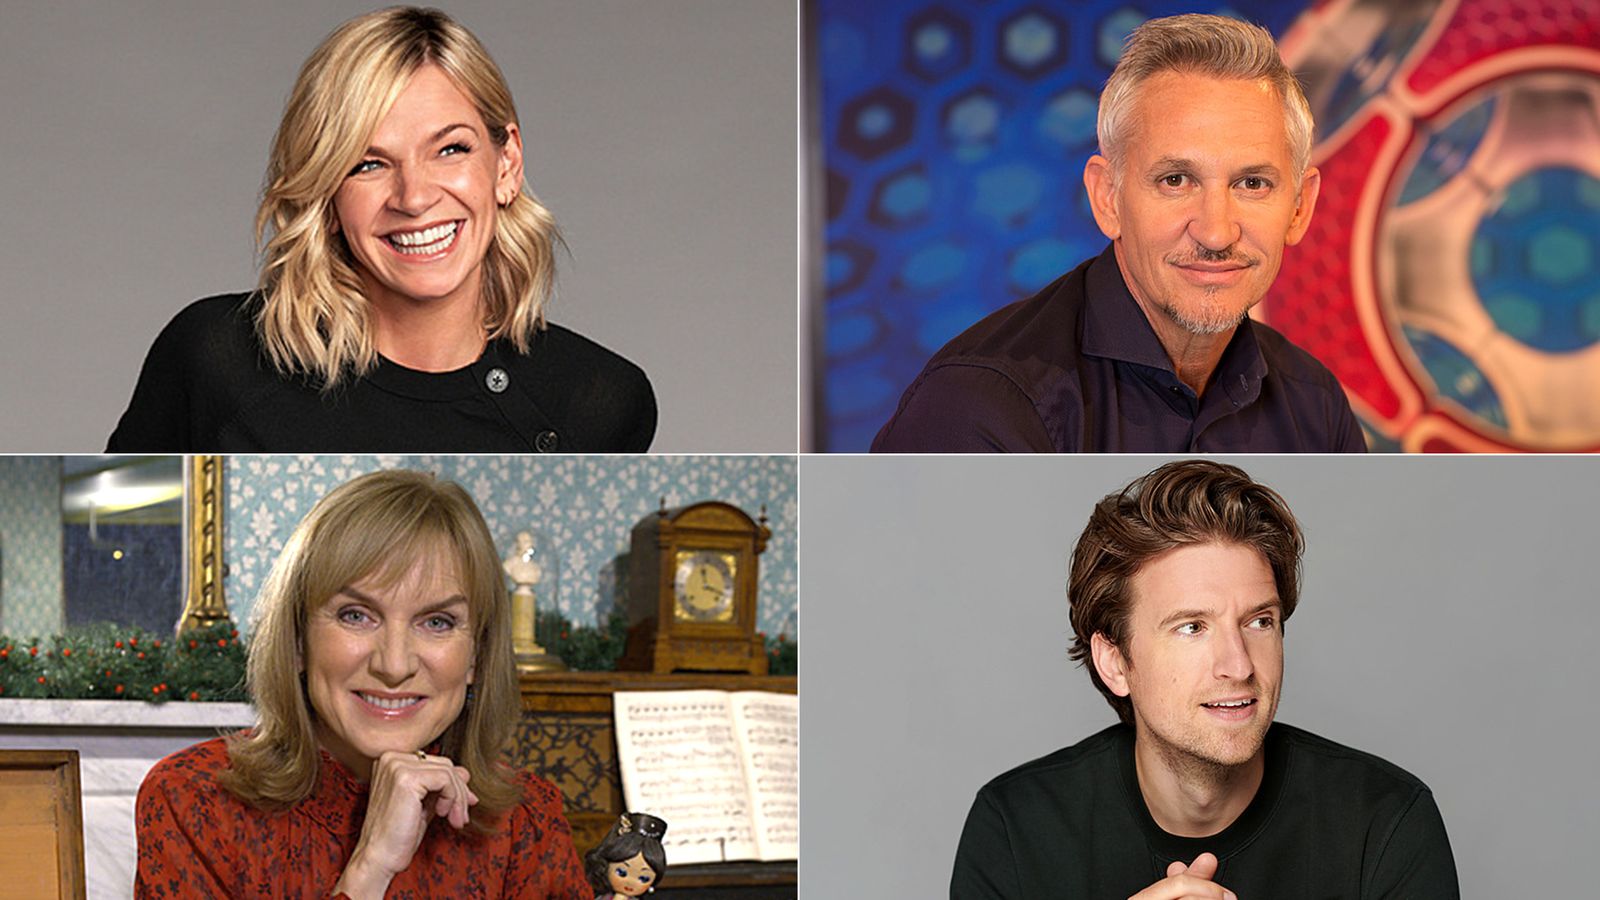 stenografi mount virkelighed BBC reveals highest-paid stars: Gary Lineker, Zoe Ball and Greg James among  broadcaster's top earners | Ents & Arts News | Sky News